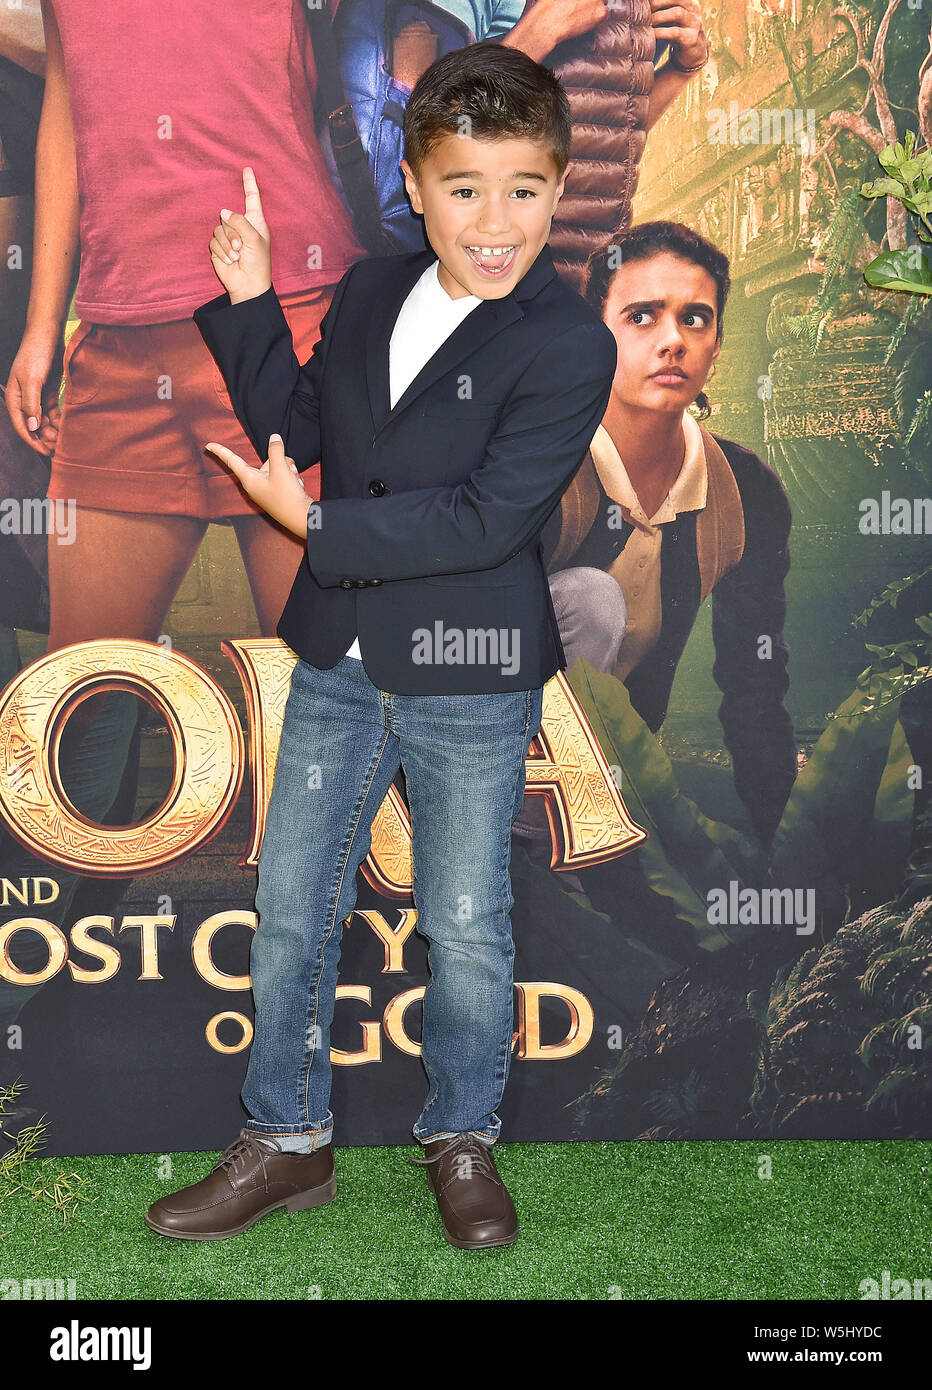 LOS ANGELES, CA - JULY 28: David Miranda attends the LA Premiere of Paramount Pictures' 'Dora And The Lost City Of Gold' at Regal Cinemas L.A. Live on July 28, 2019 in Los Angeles, California. Stock Photo